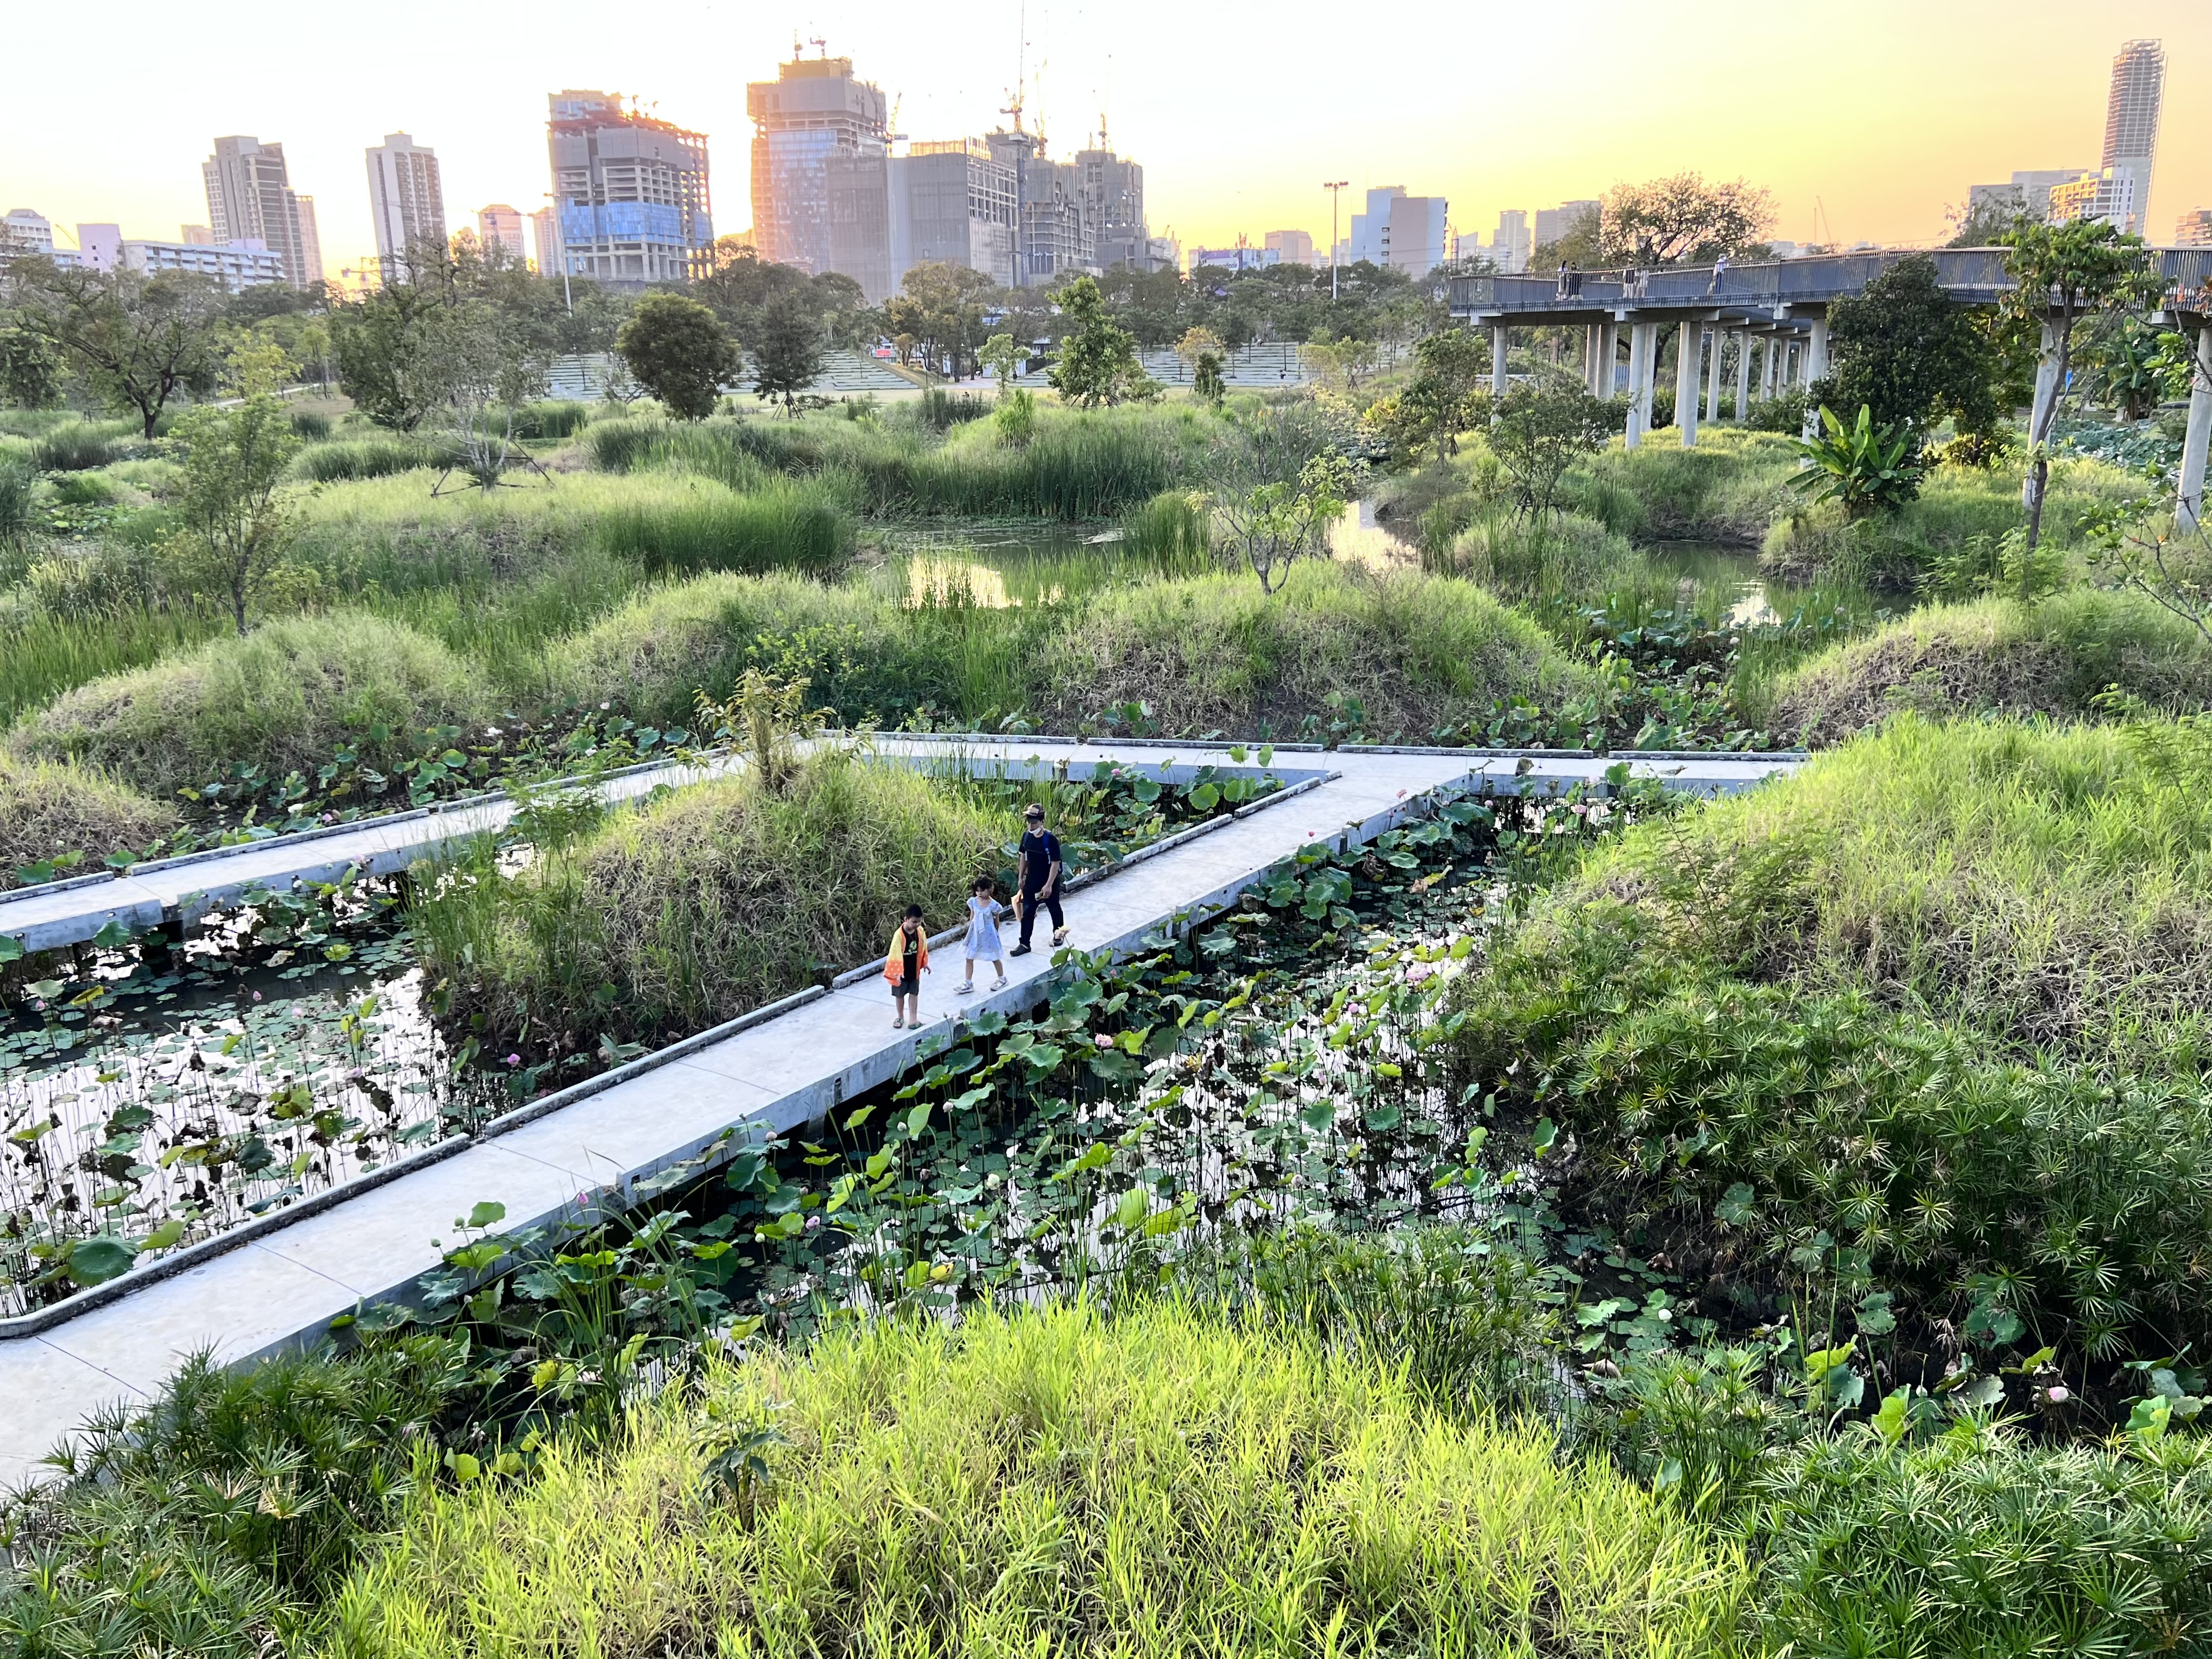 Benjakitti Park has completed its expansion into a nearly 300-rai (about 480,000 square meters) massive green space in 2022